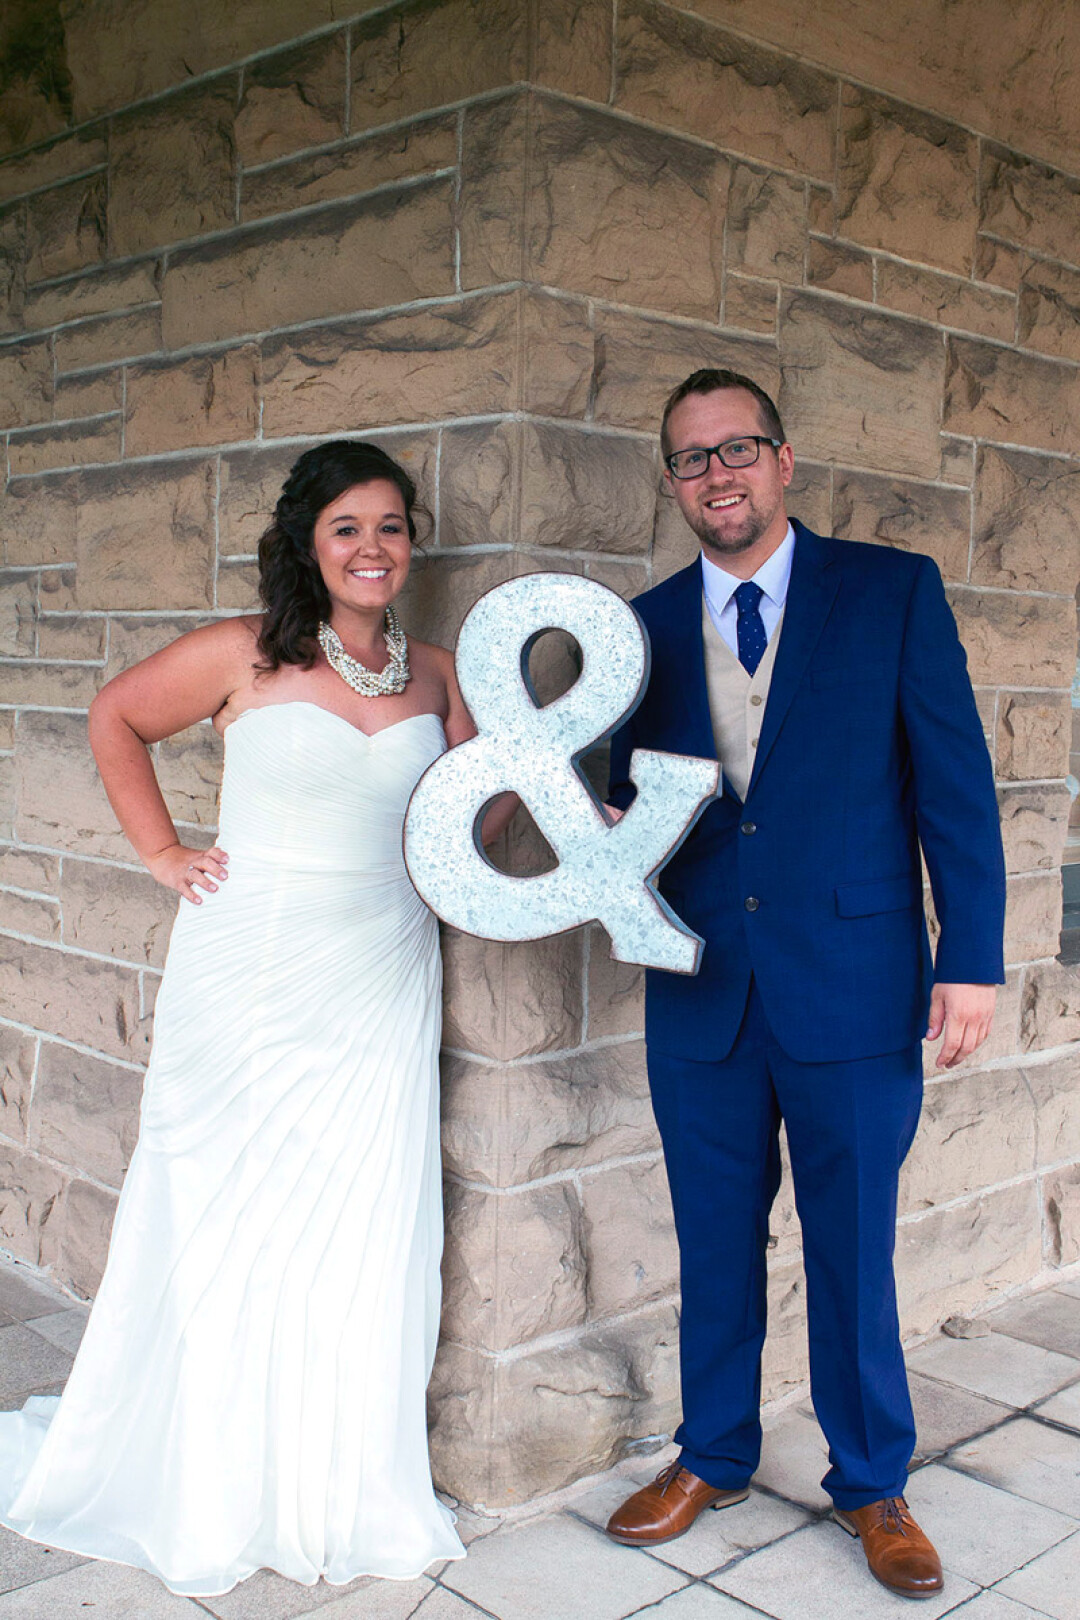 Kira and Mike Sullivan pose on the porch of the Louis Smith Tainter House at UW-Stout on their wedding day, Aug. 20. The couple met on campus in 2009 and were married at the student center.